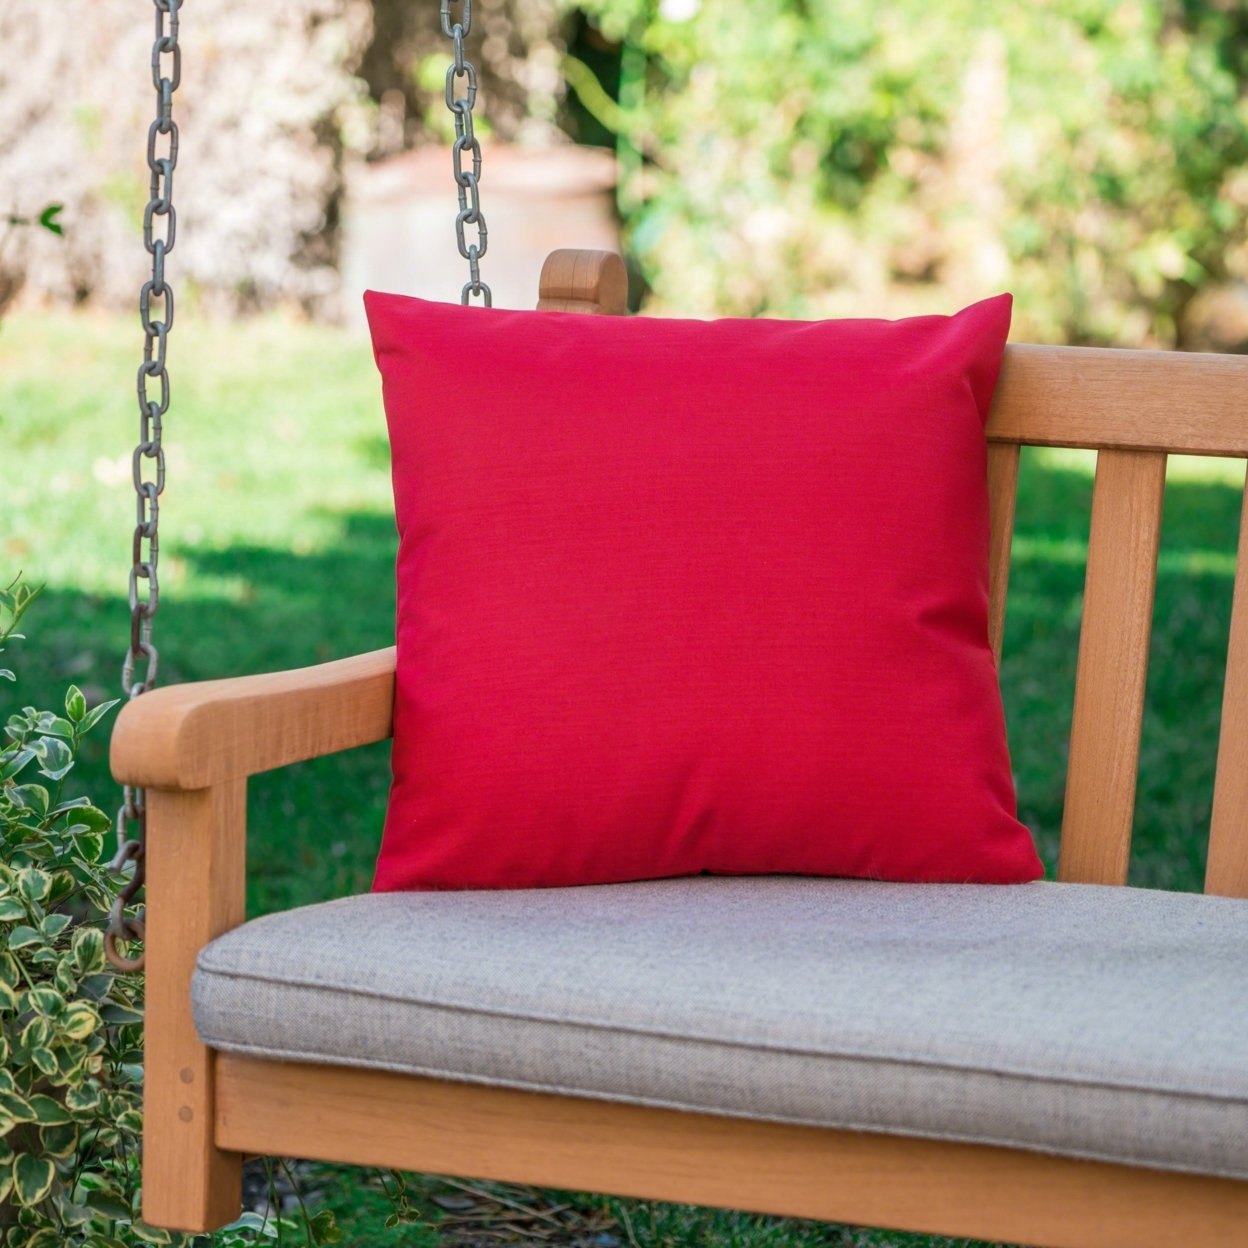 Coronado Outdoor Water Resistant Square Throw Pillow - Red, Set Of 2